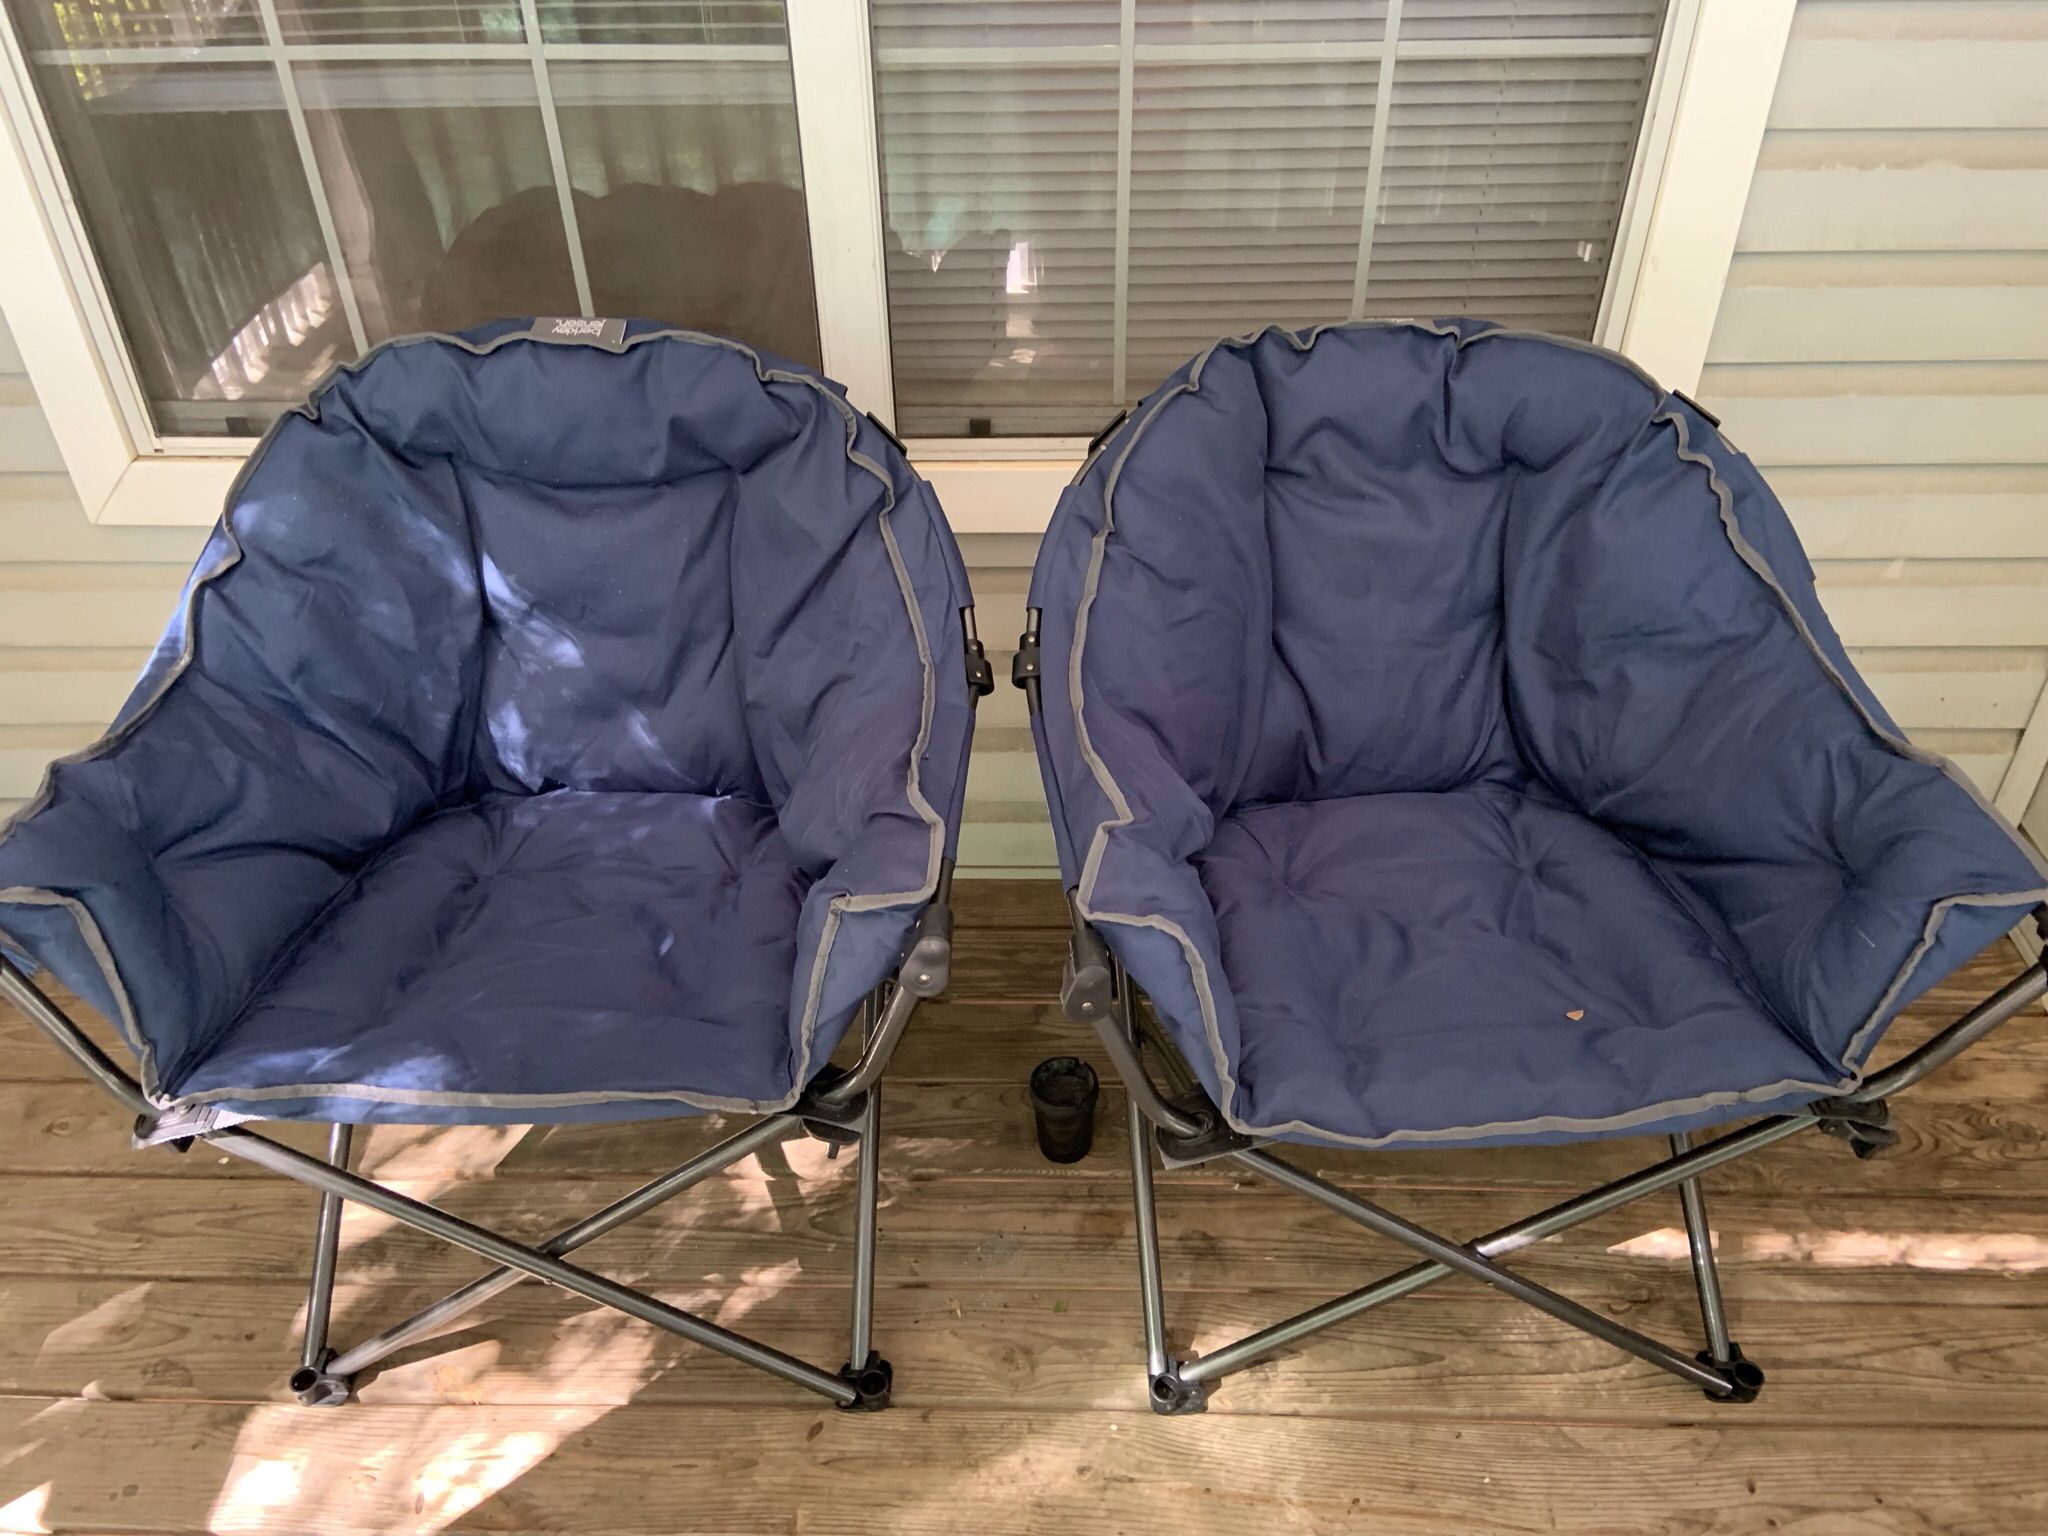 Camping Chairs For Sale